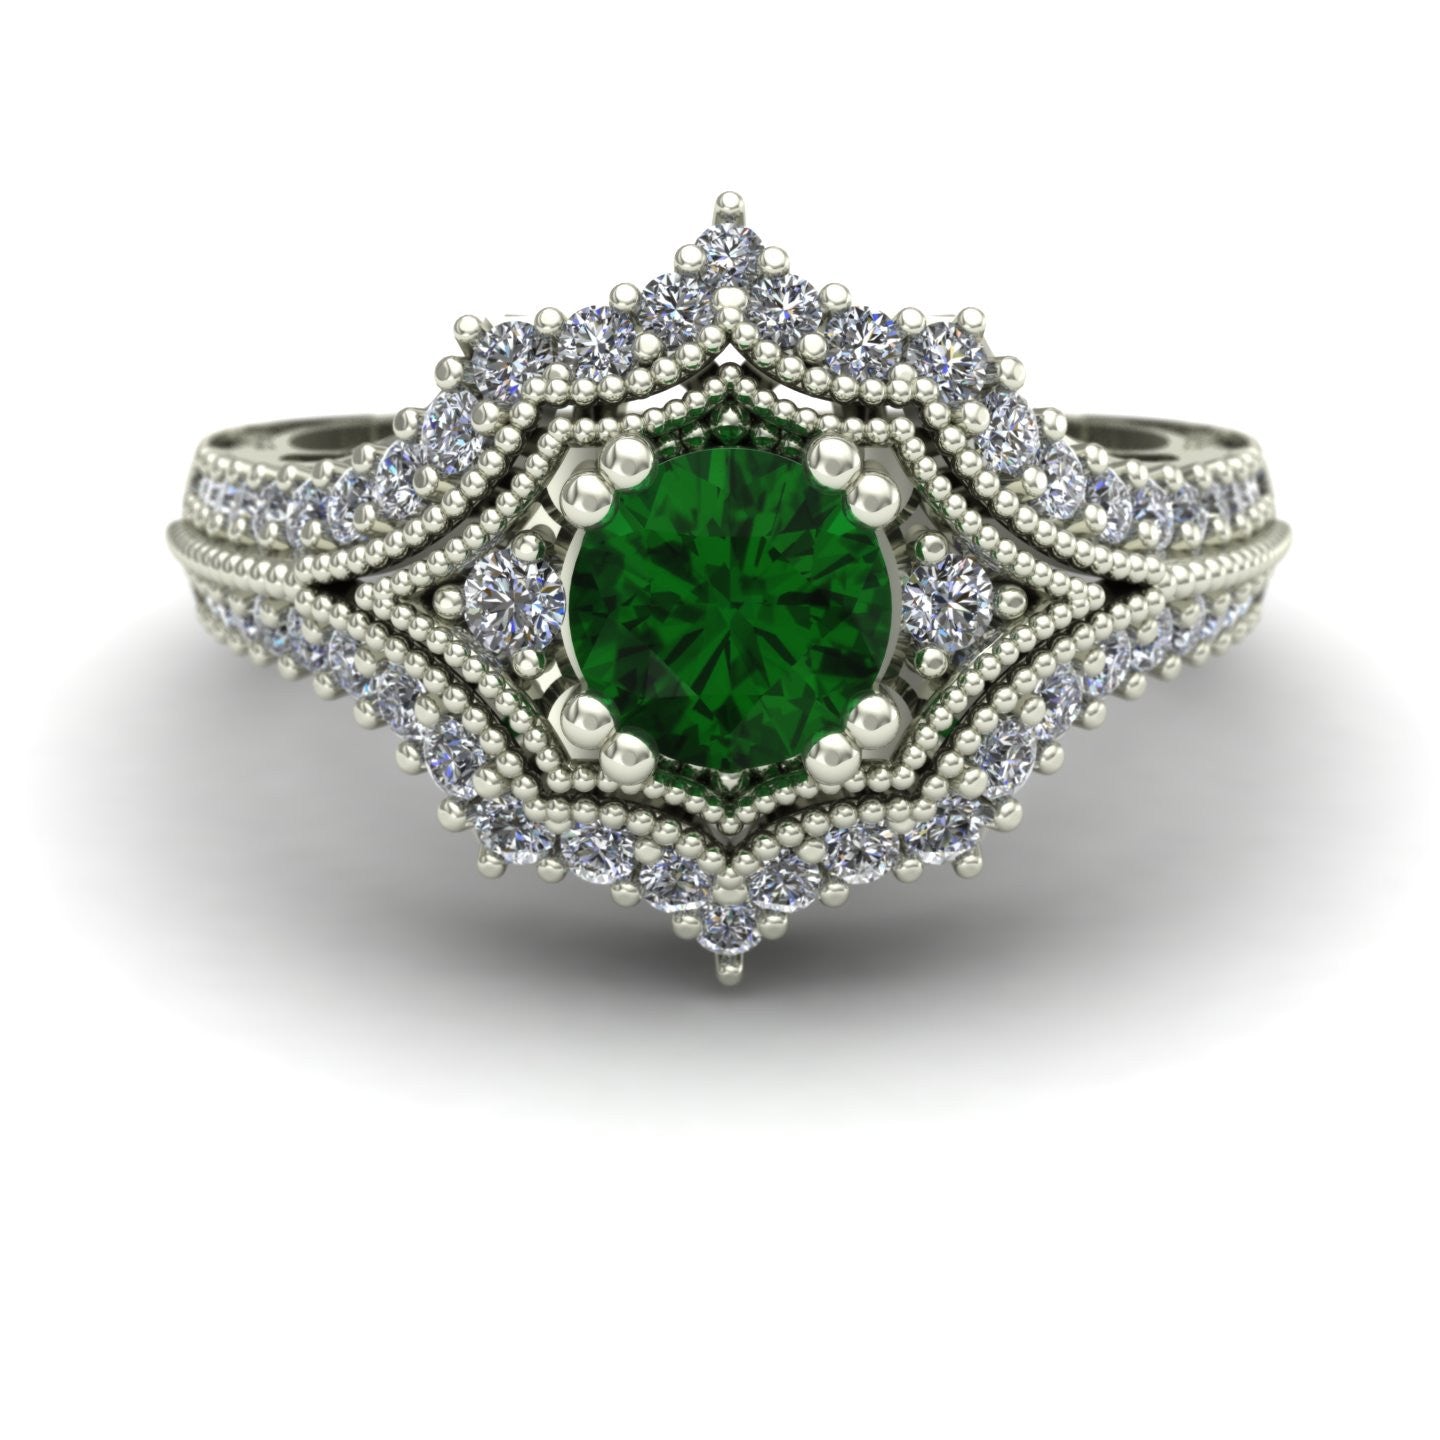 Emerald and diamond ring with floral carving in 14k white gold - Charles Babb Designs - top view